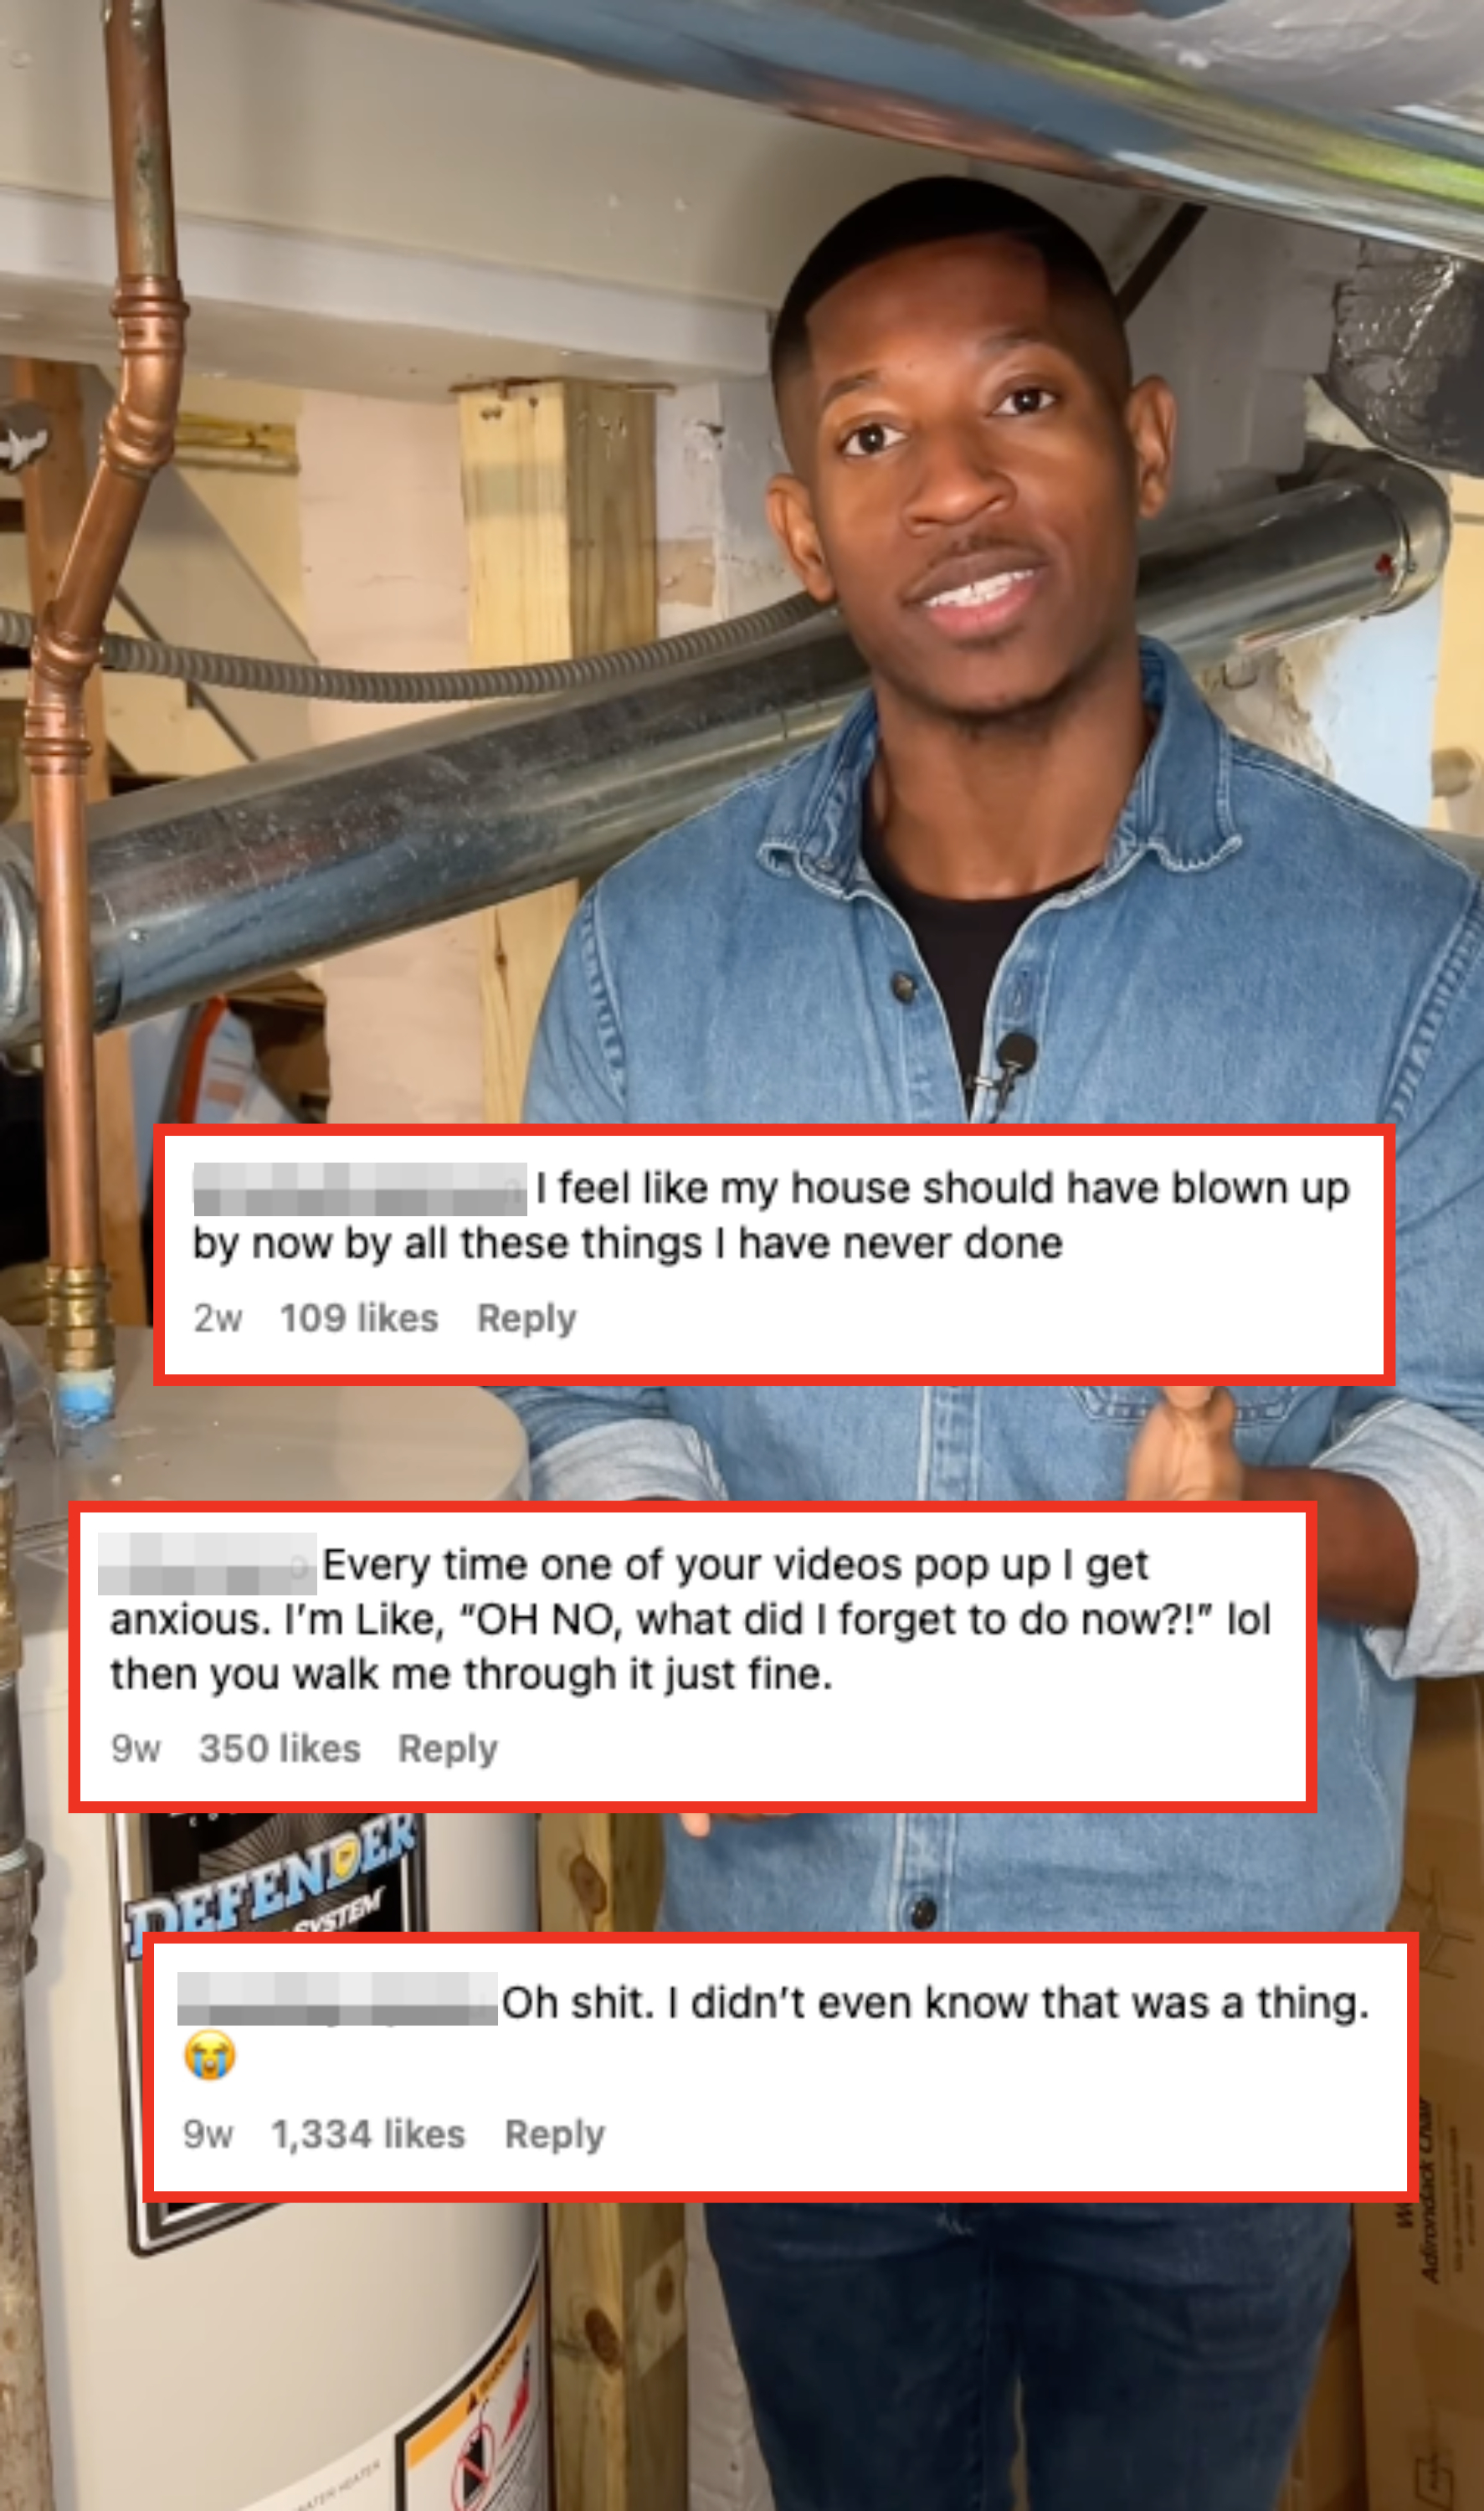 Kyshawn in a denim jacket with text overlays from social media posts expressing surprise and humor about learning new facts about home maintenance